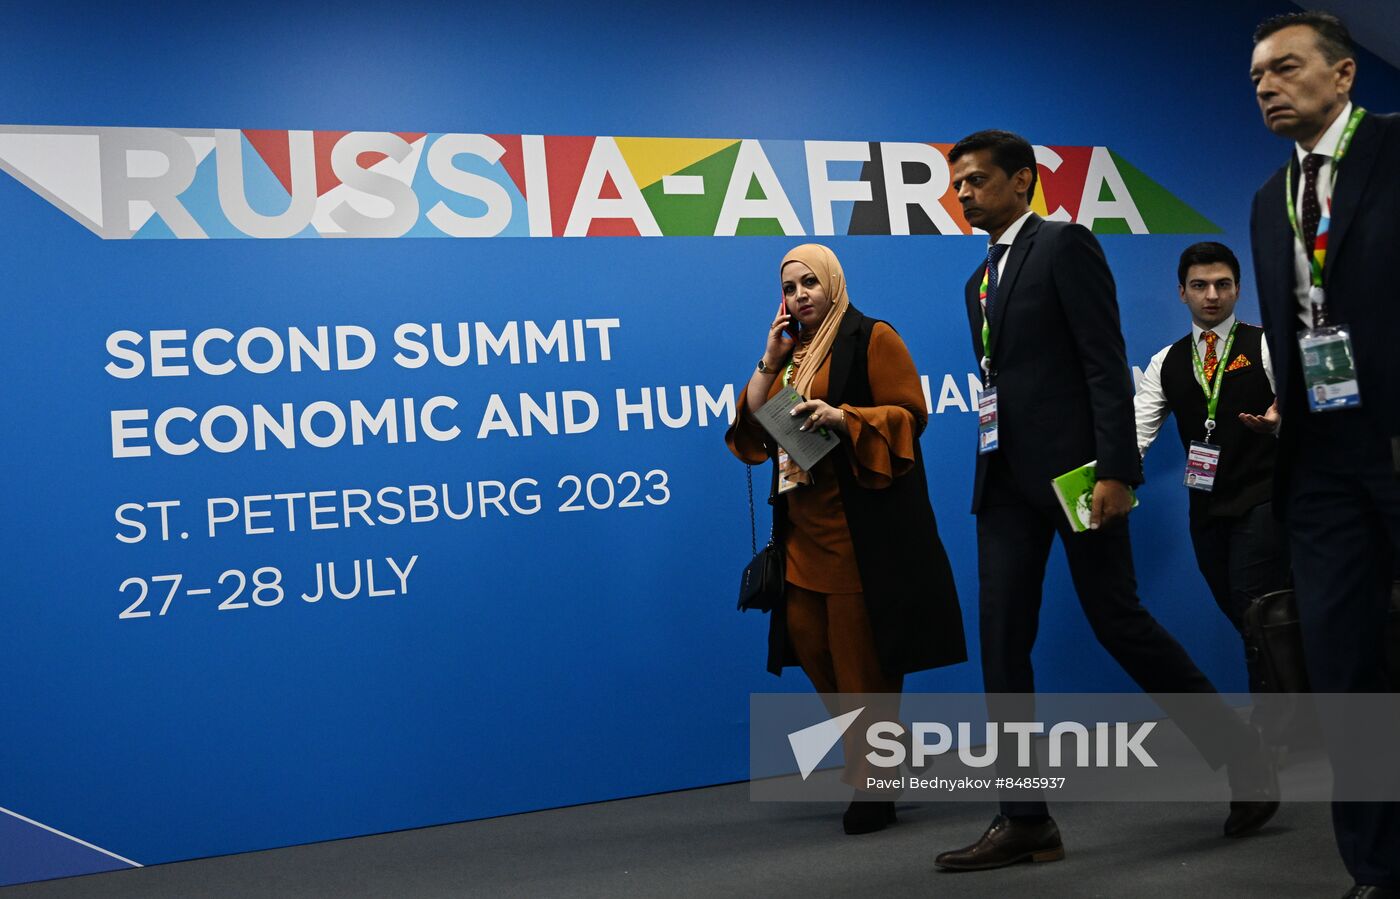 2nd Russia-Africa Summit. Forum events